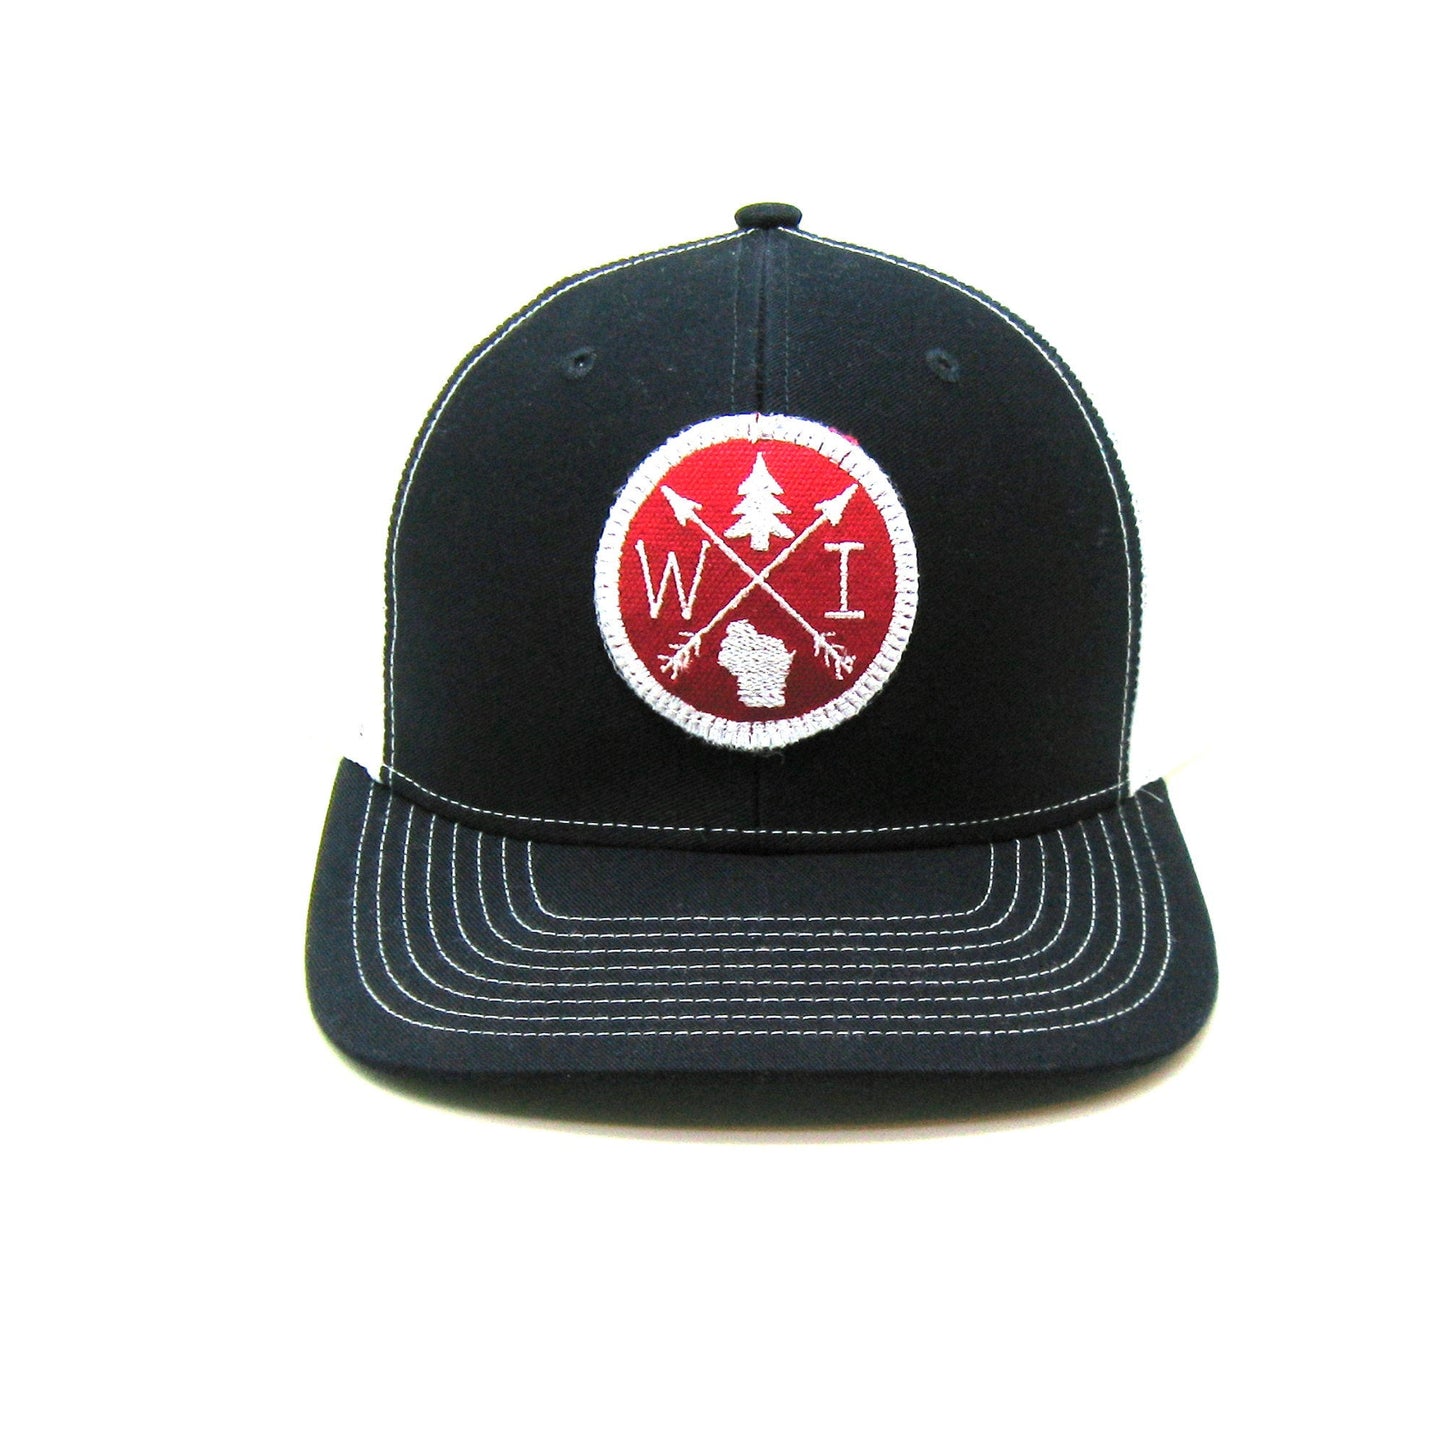 Wisconsin Hat - Navy Snapback with Red and White Arrow Patch